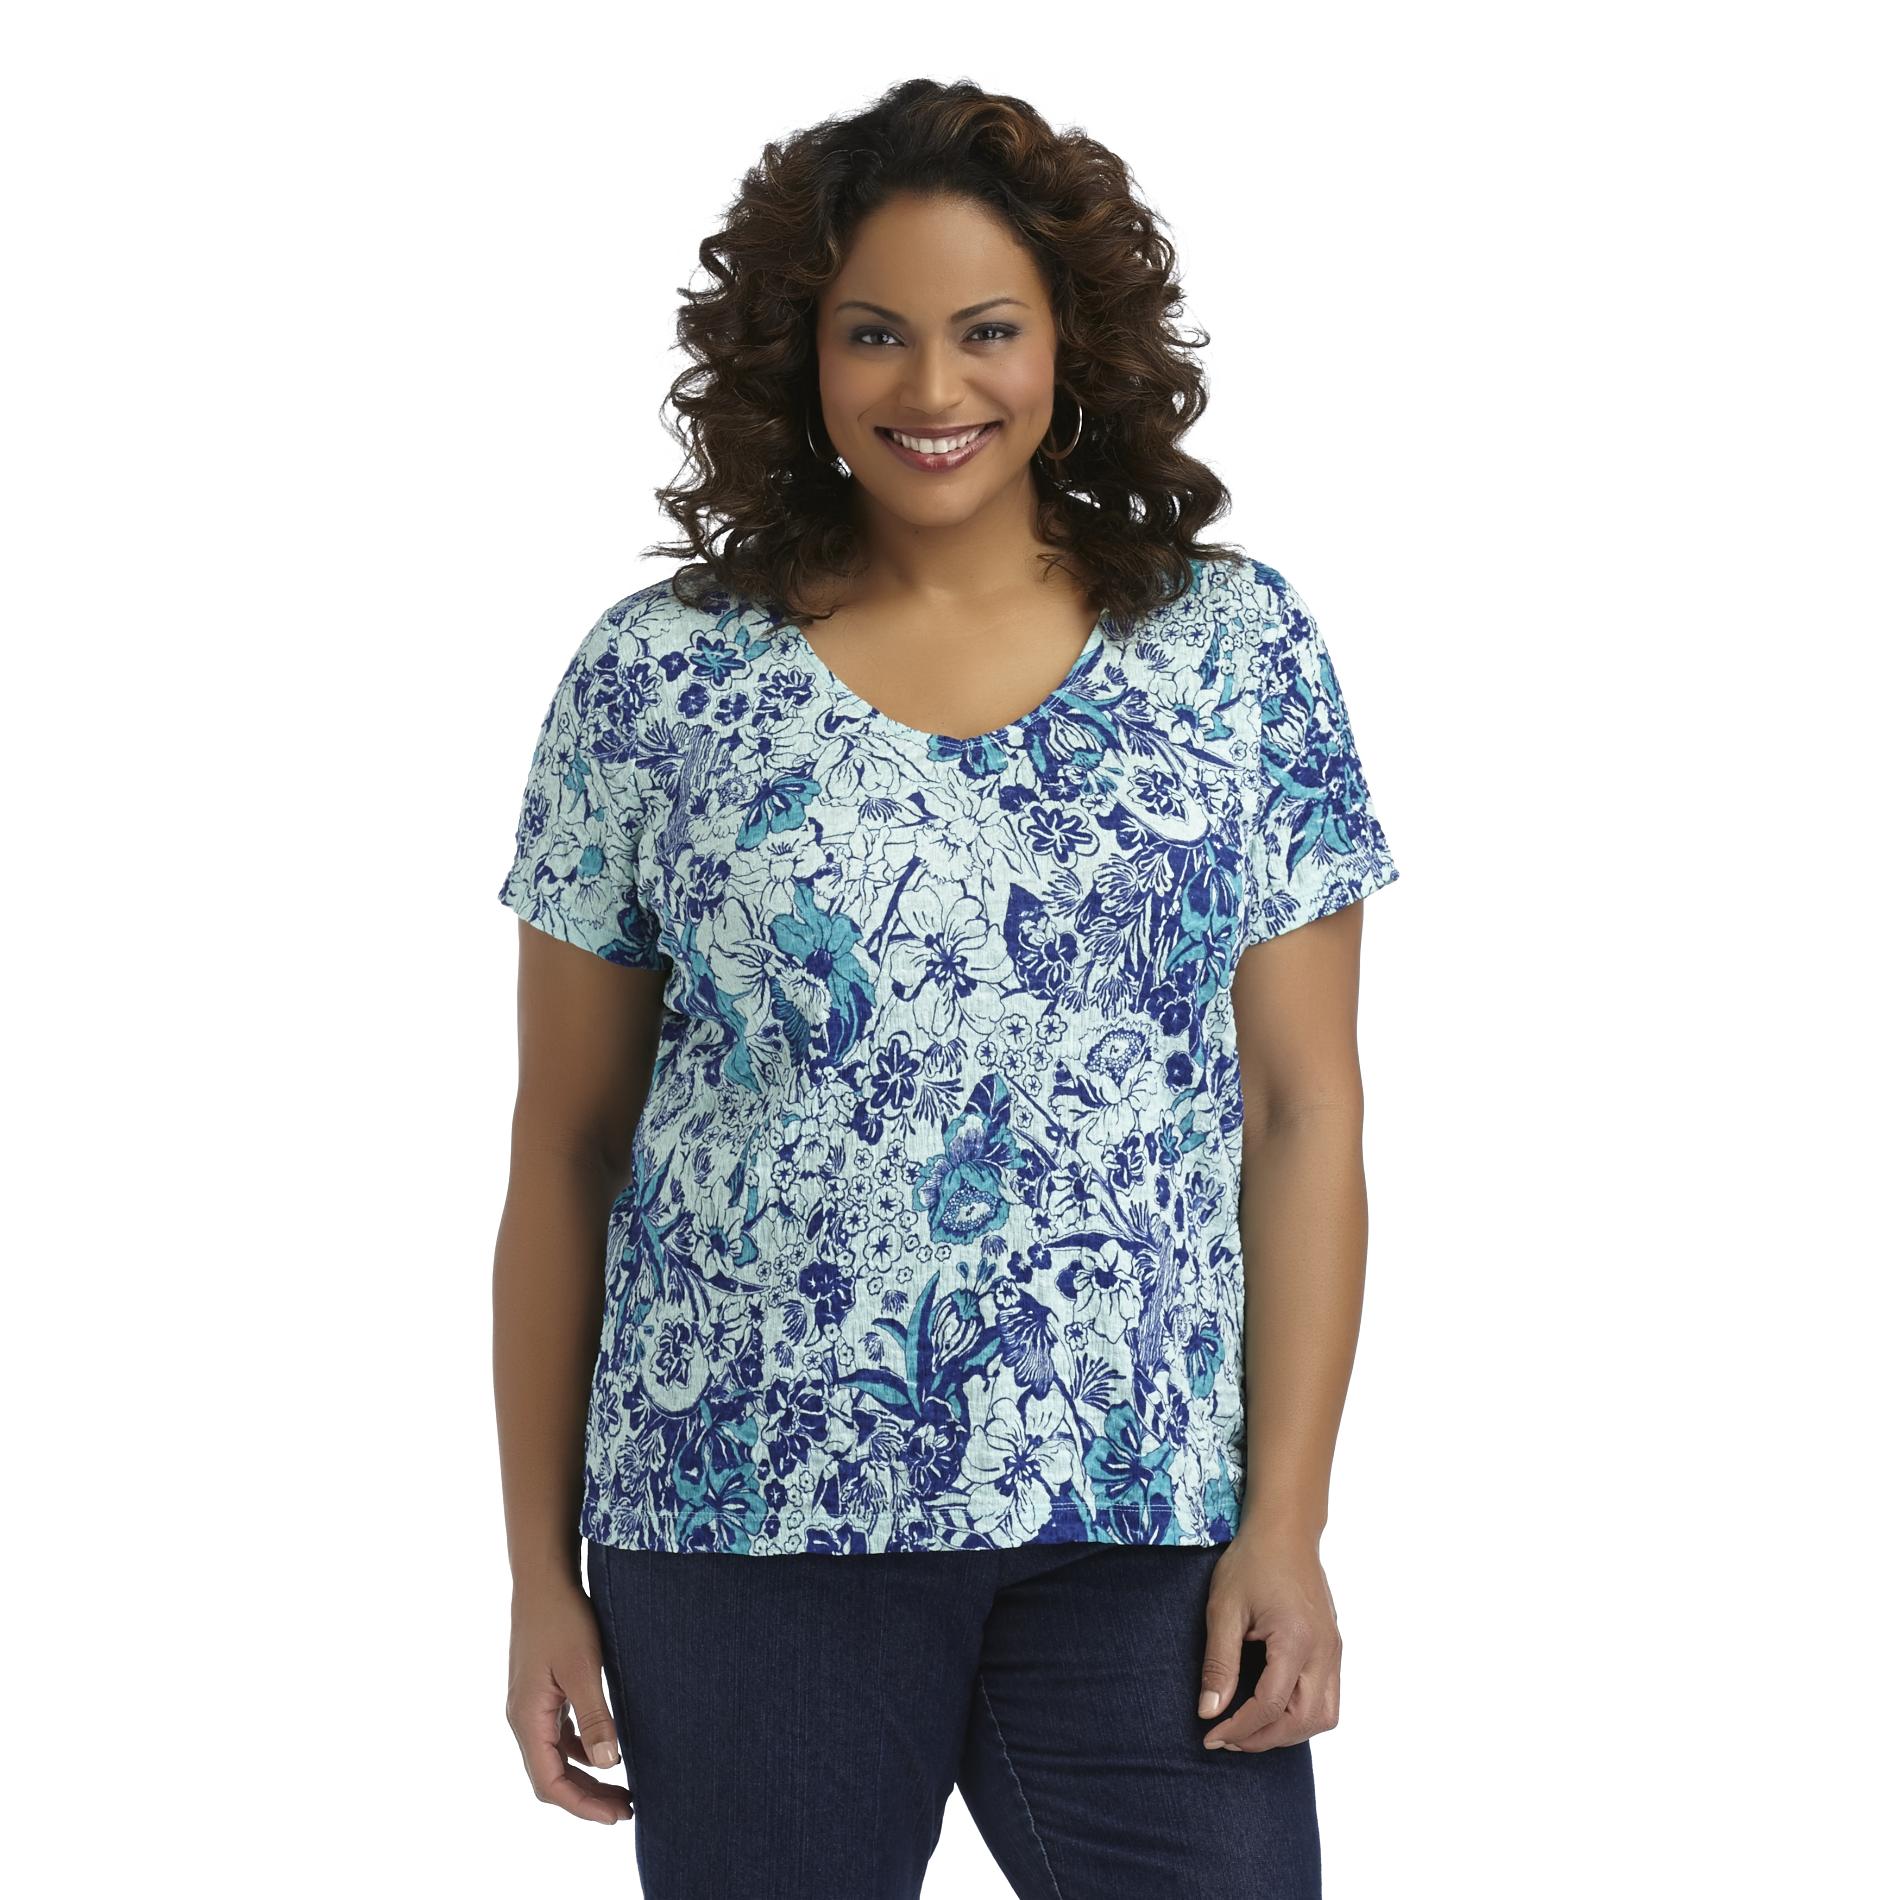 Jaclyn Smith Women's Plus Crinkle Woven Top - Floral